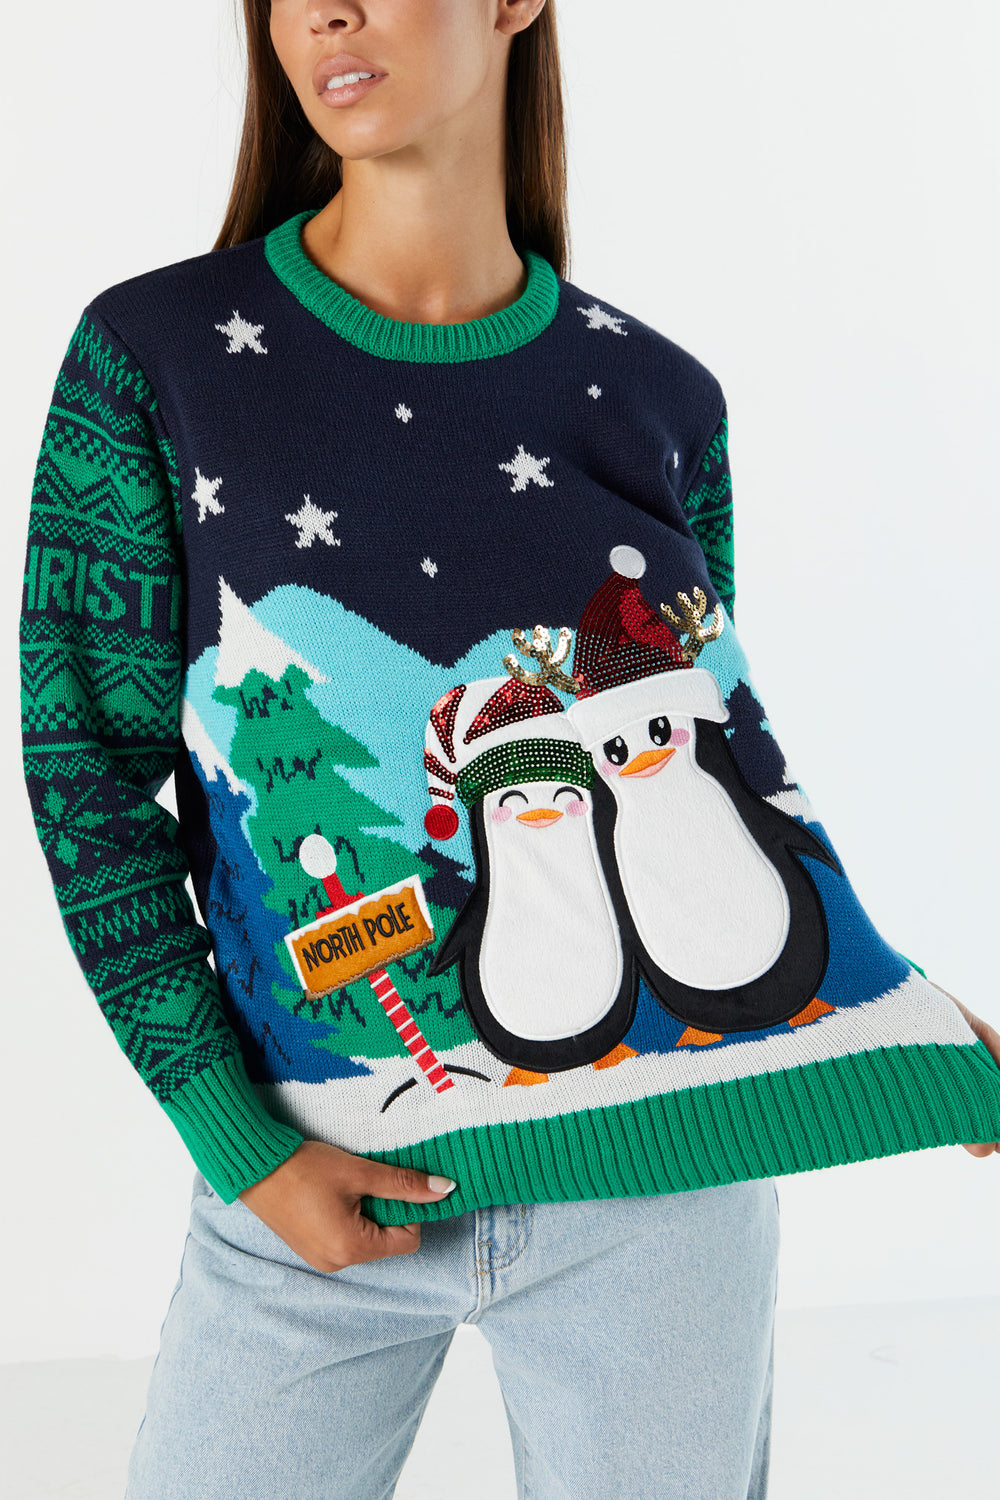 Sequin Penguin Ugly Christmas Sweater Sequin Penguin Ugly Christmas Sweater 2